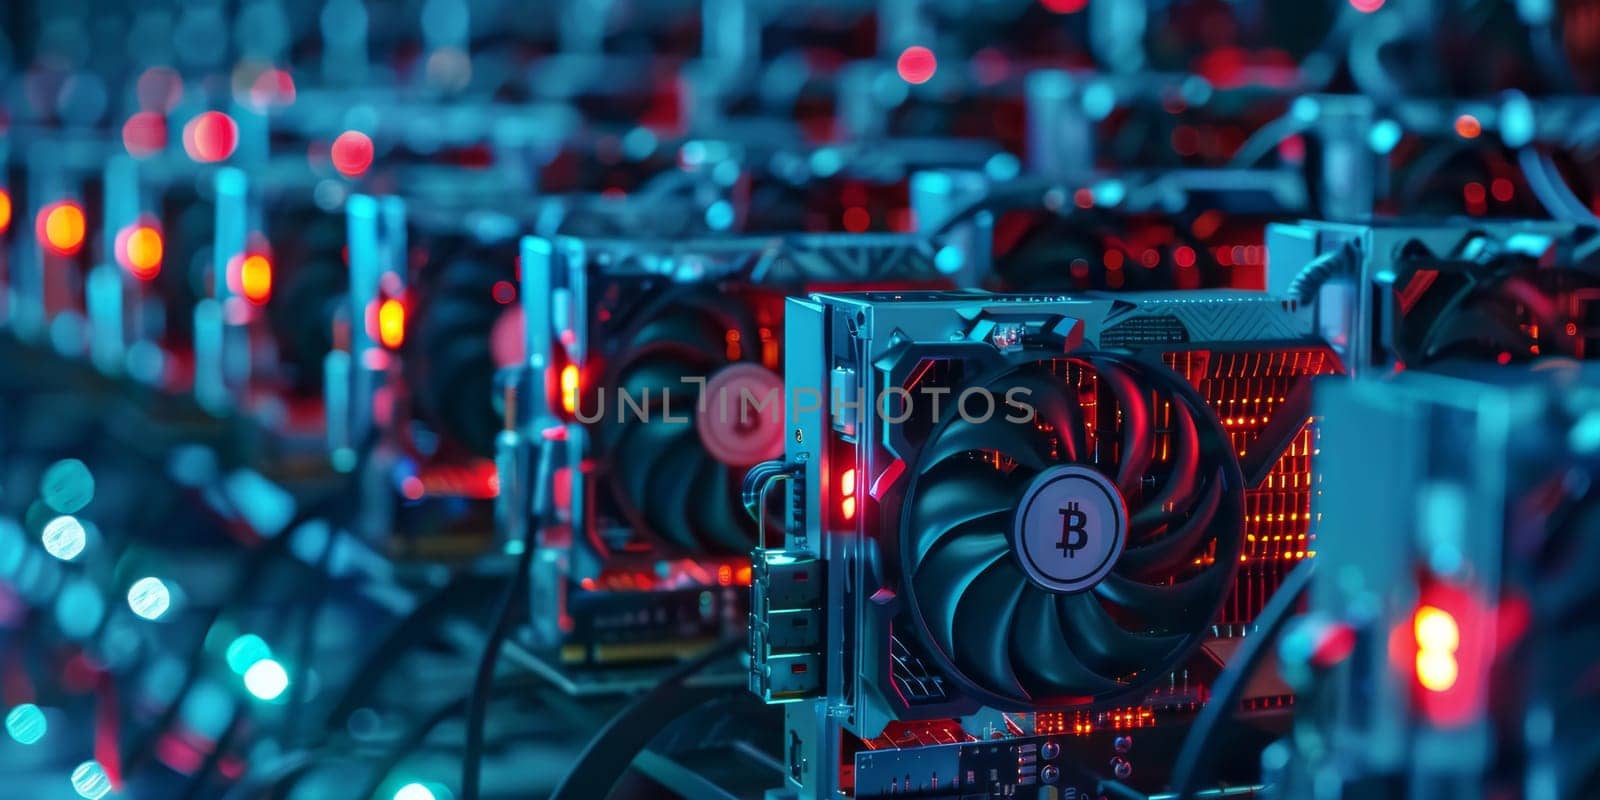 Array of computer CPUs illuminated by red and blue lights, bitcoin miners by Kadula